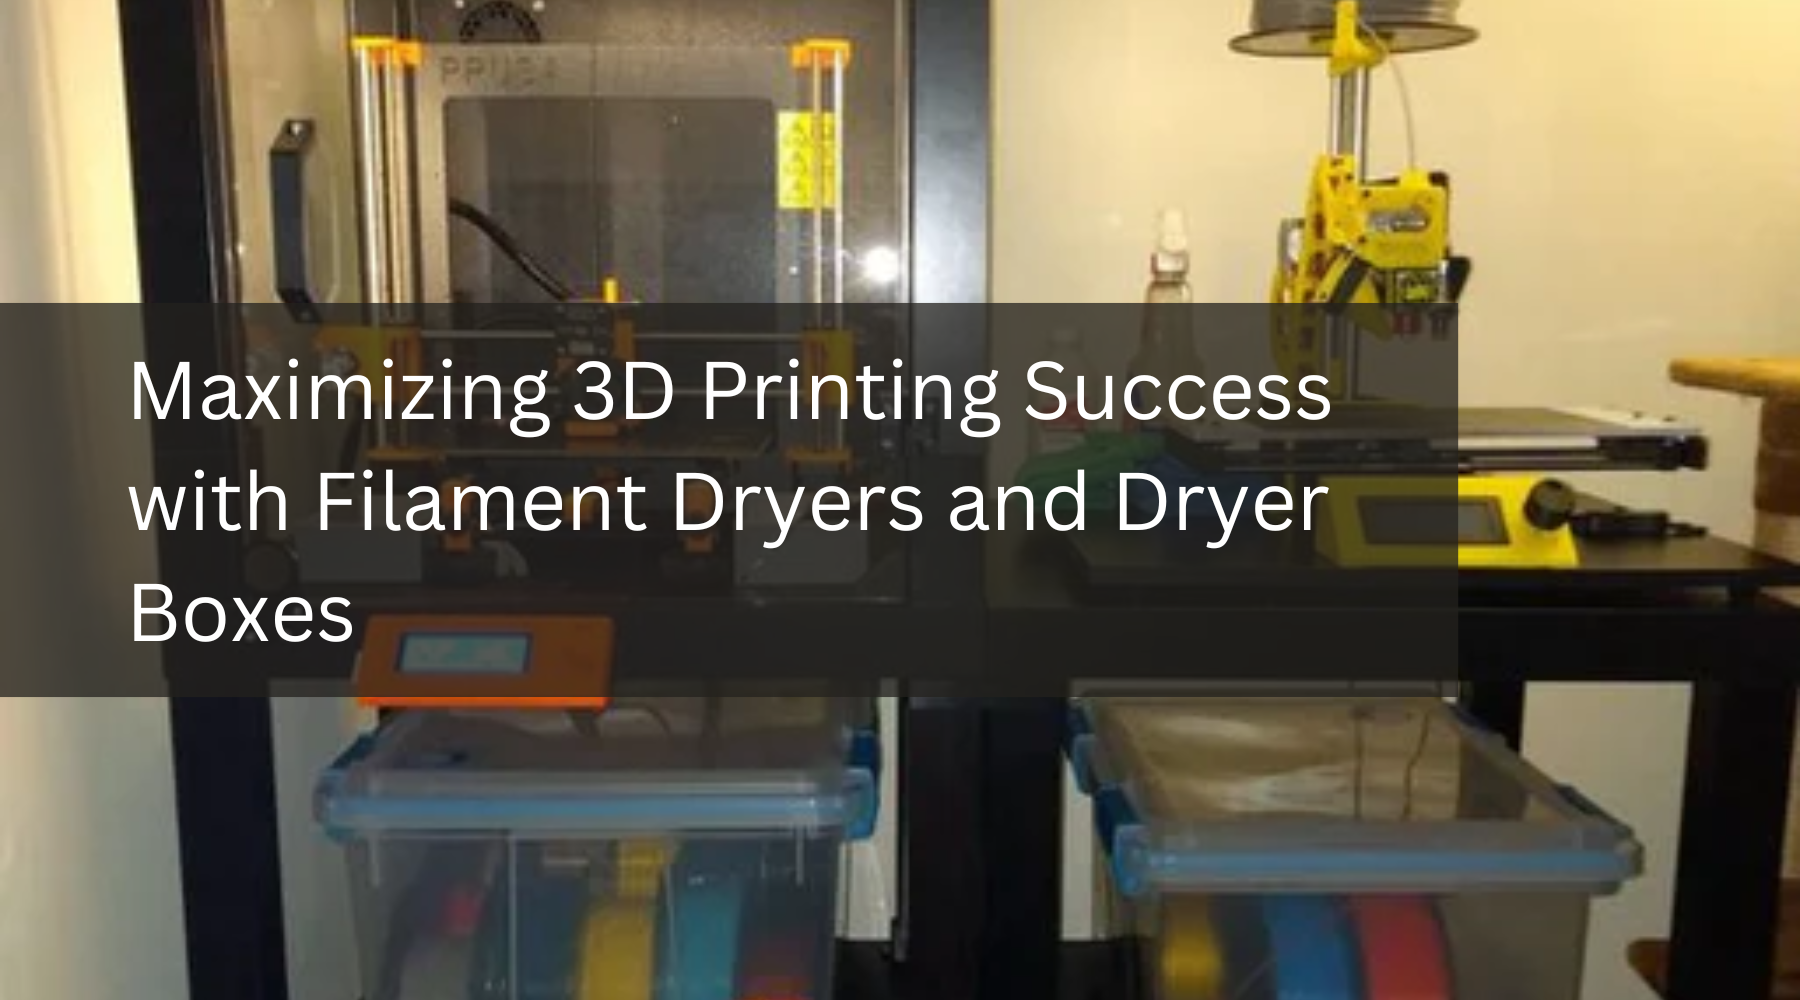 Maximizing 3D Printing Success with Filament Dryers and Dryer Boxes